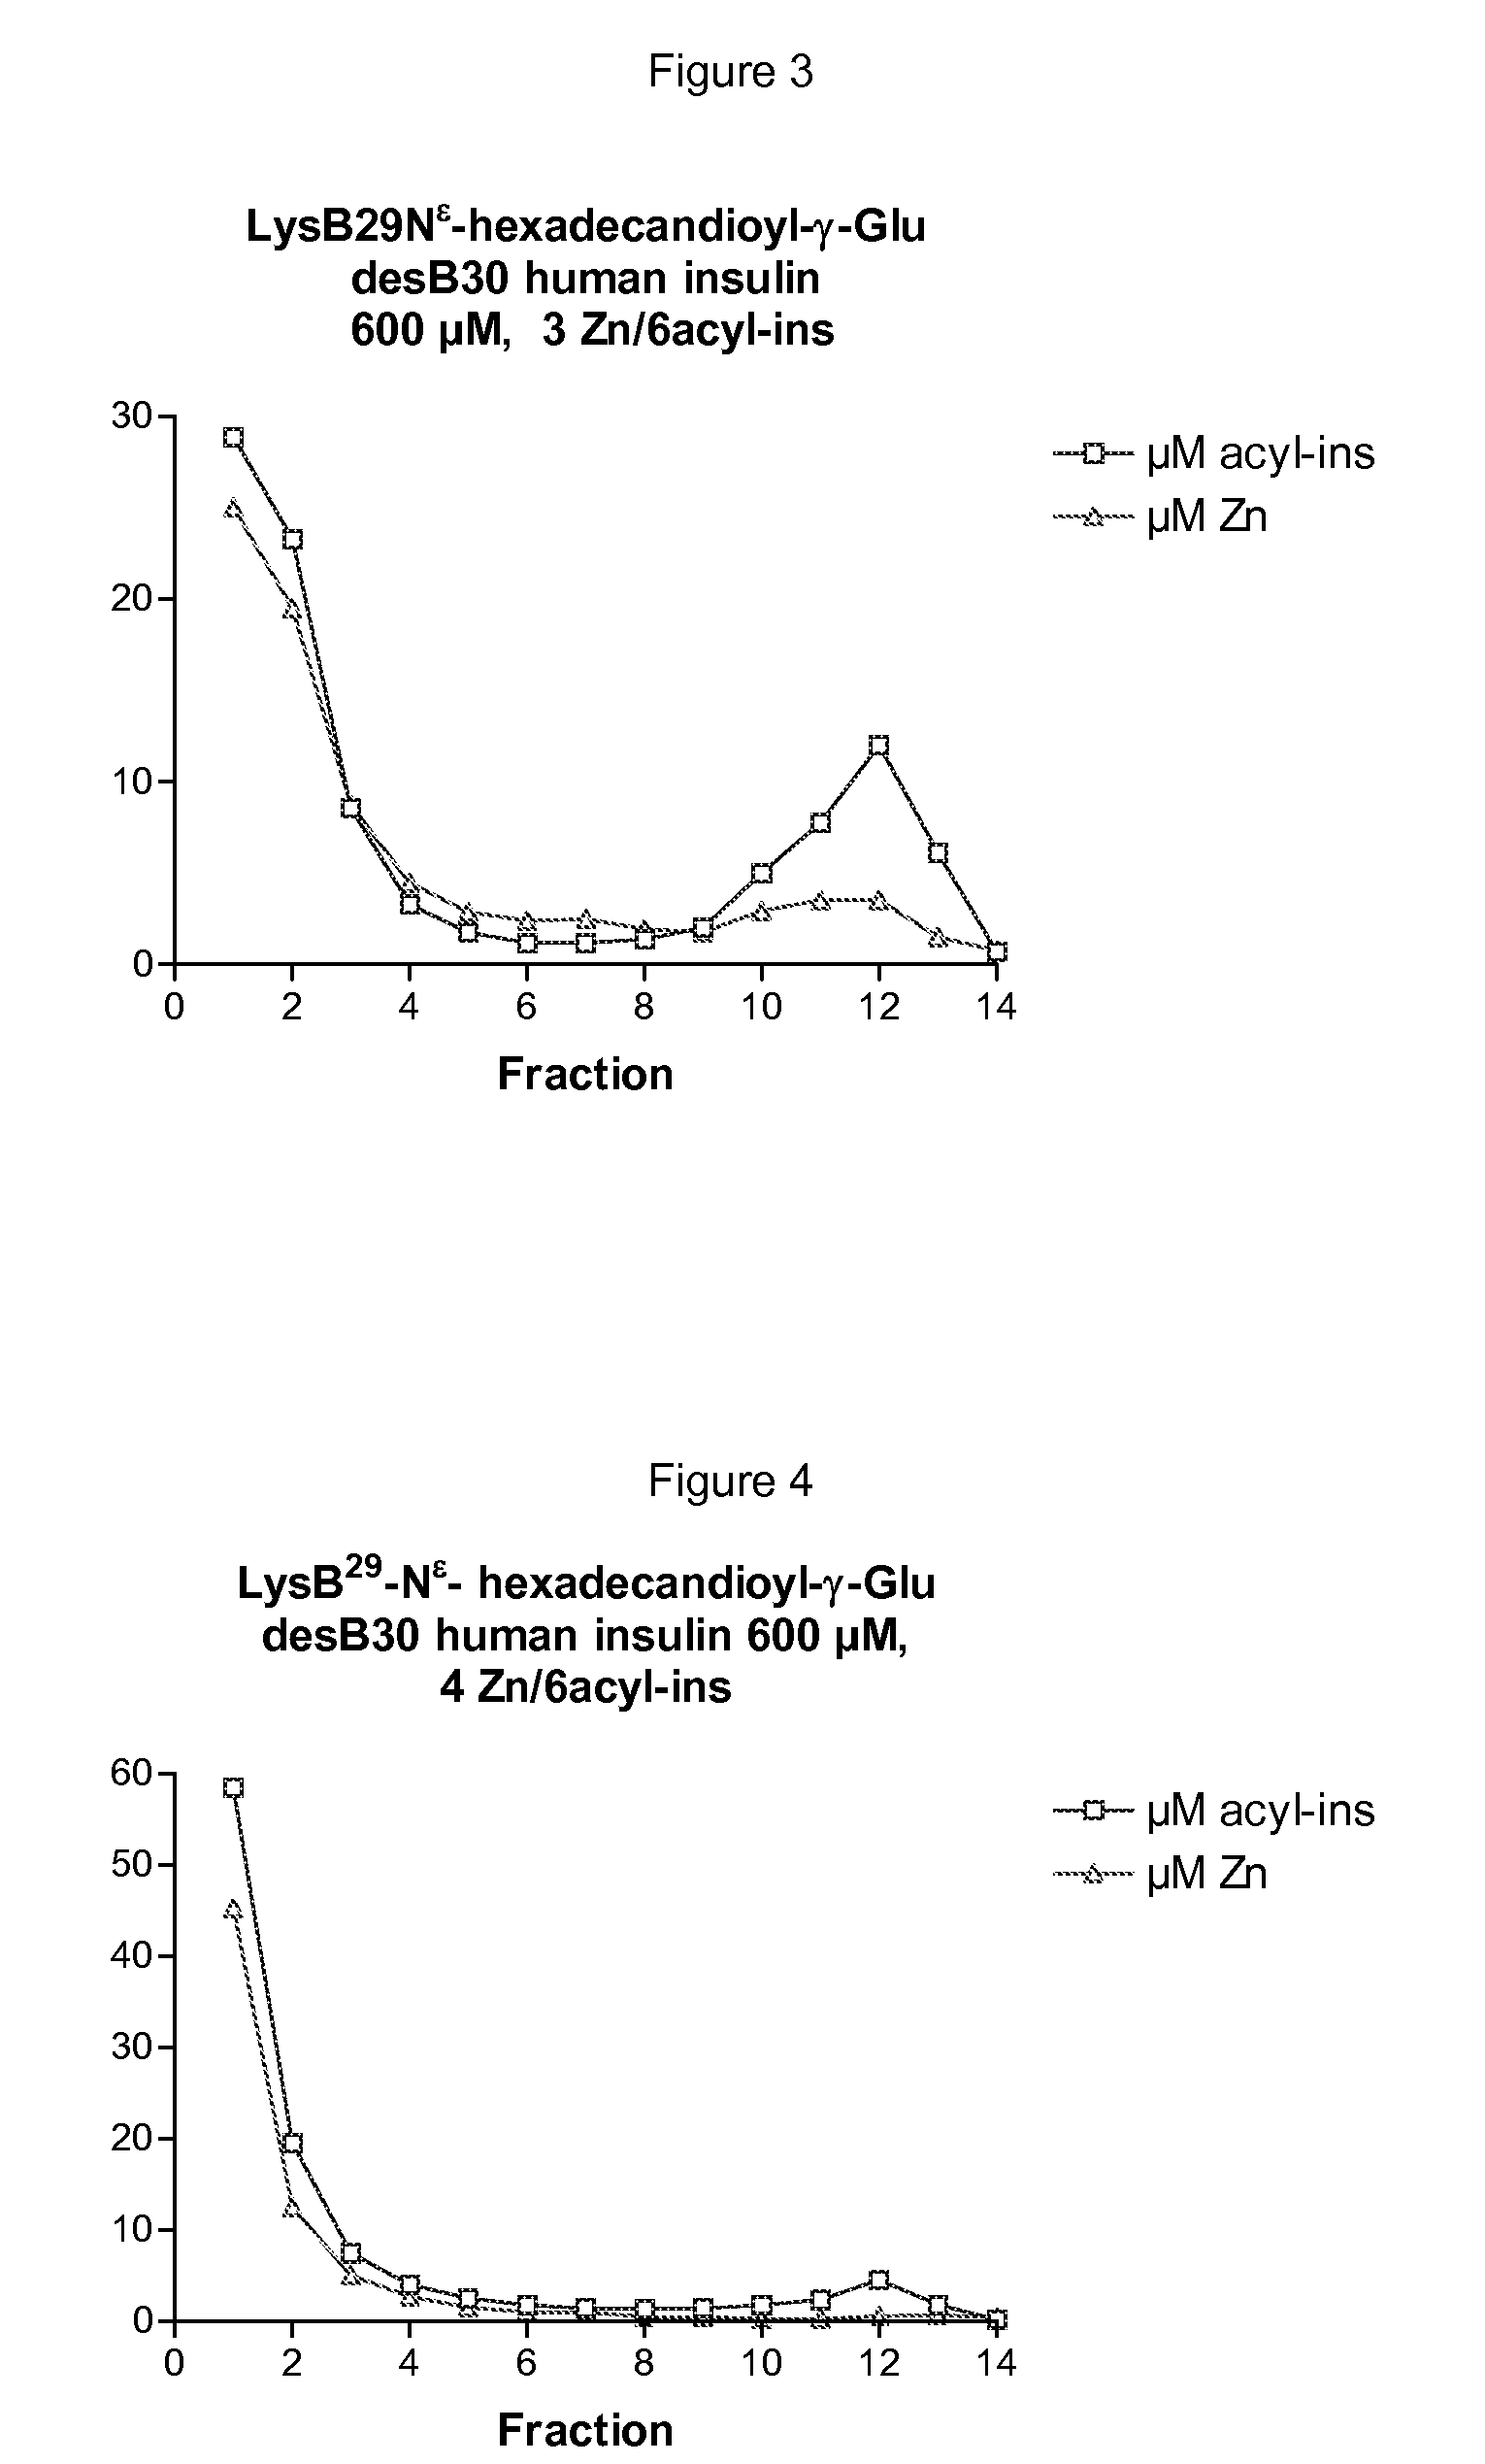 Insulin compositions and method of making a composition